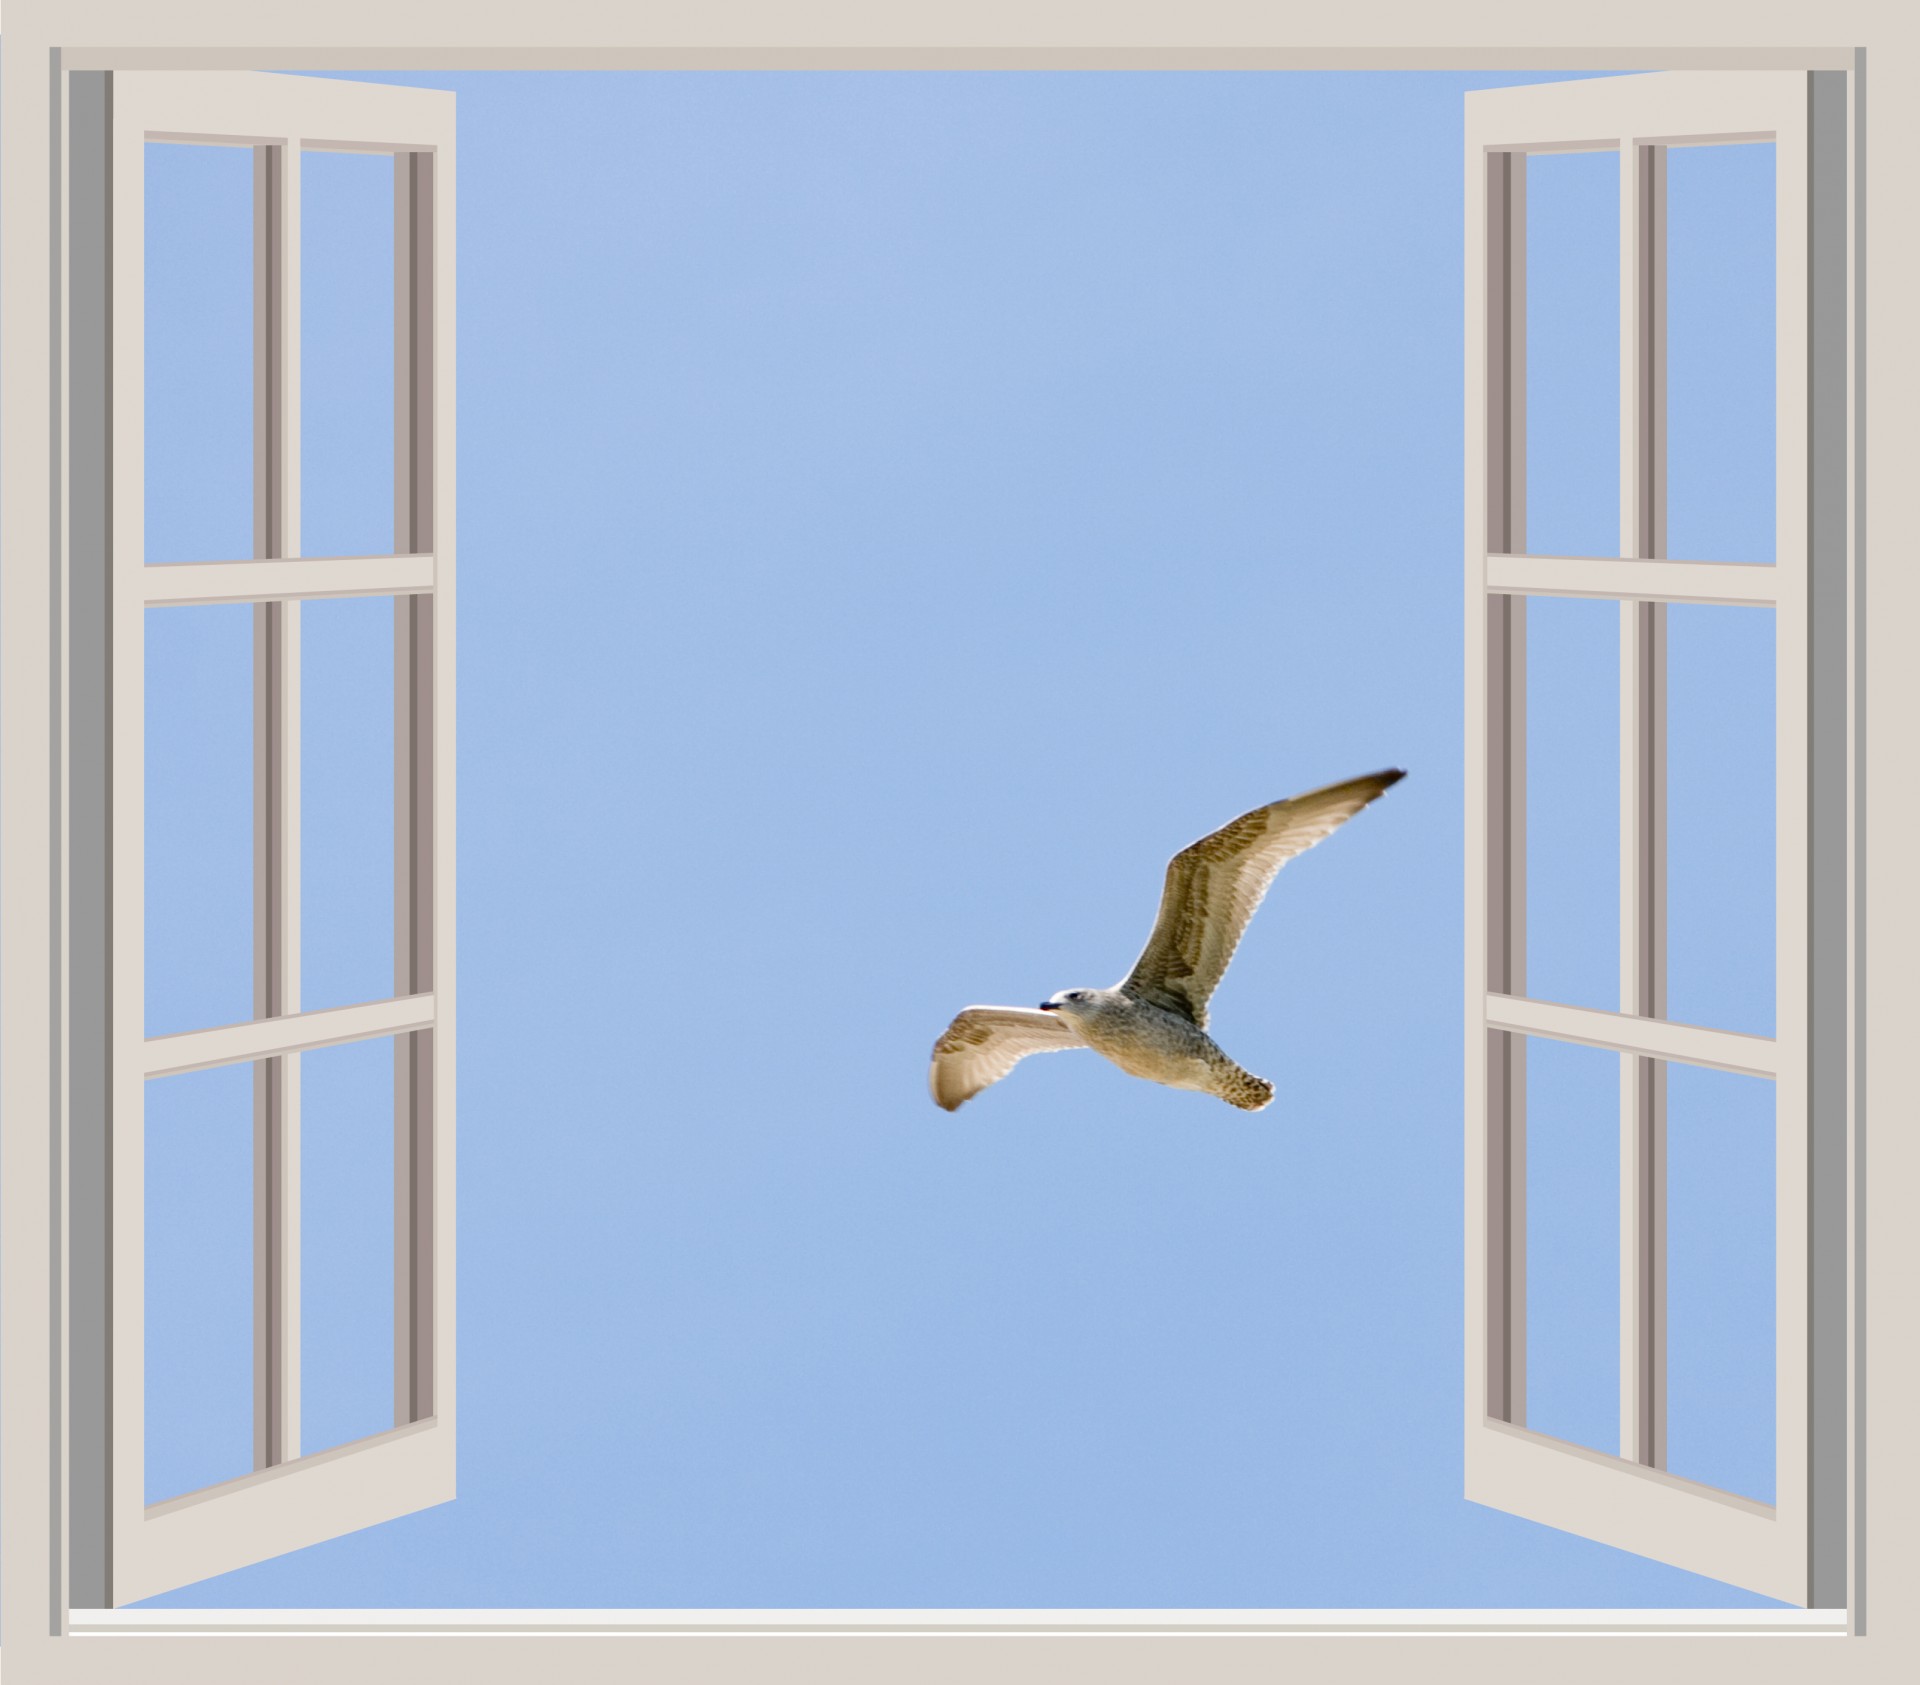 Seagull bird against blue sky flying past an open window view